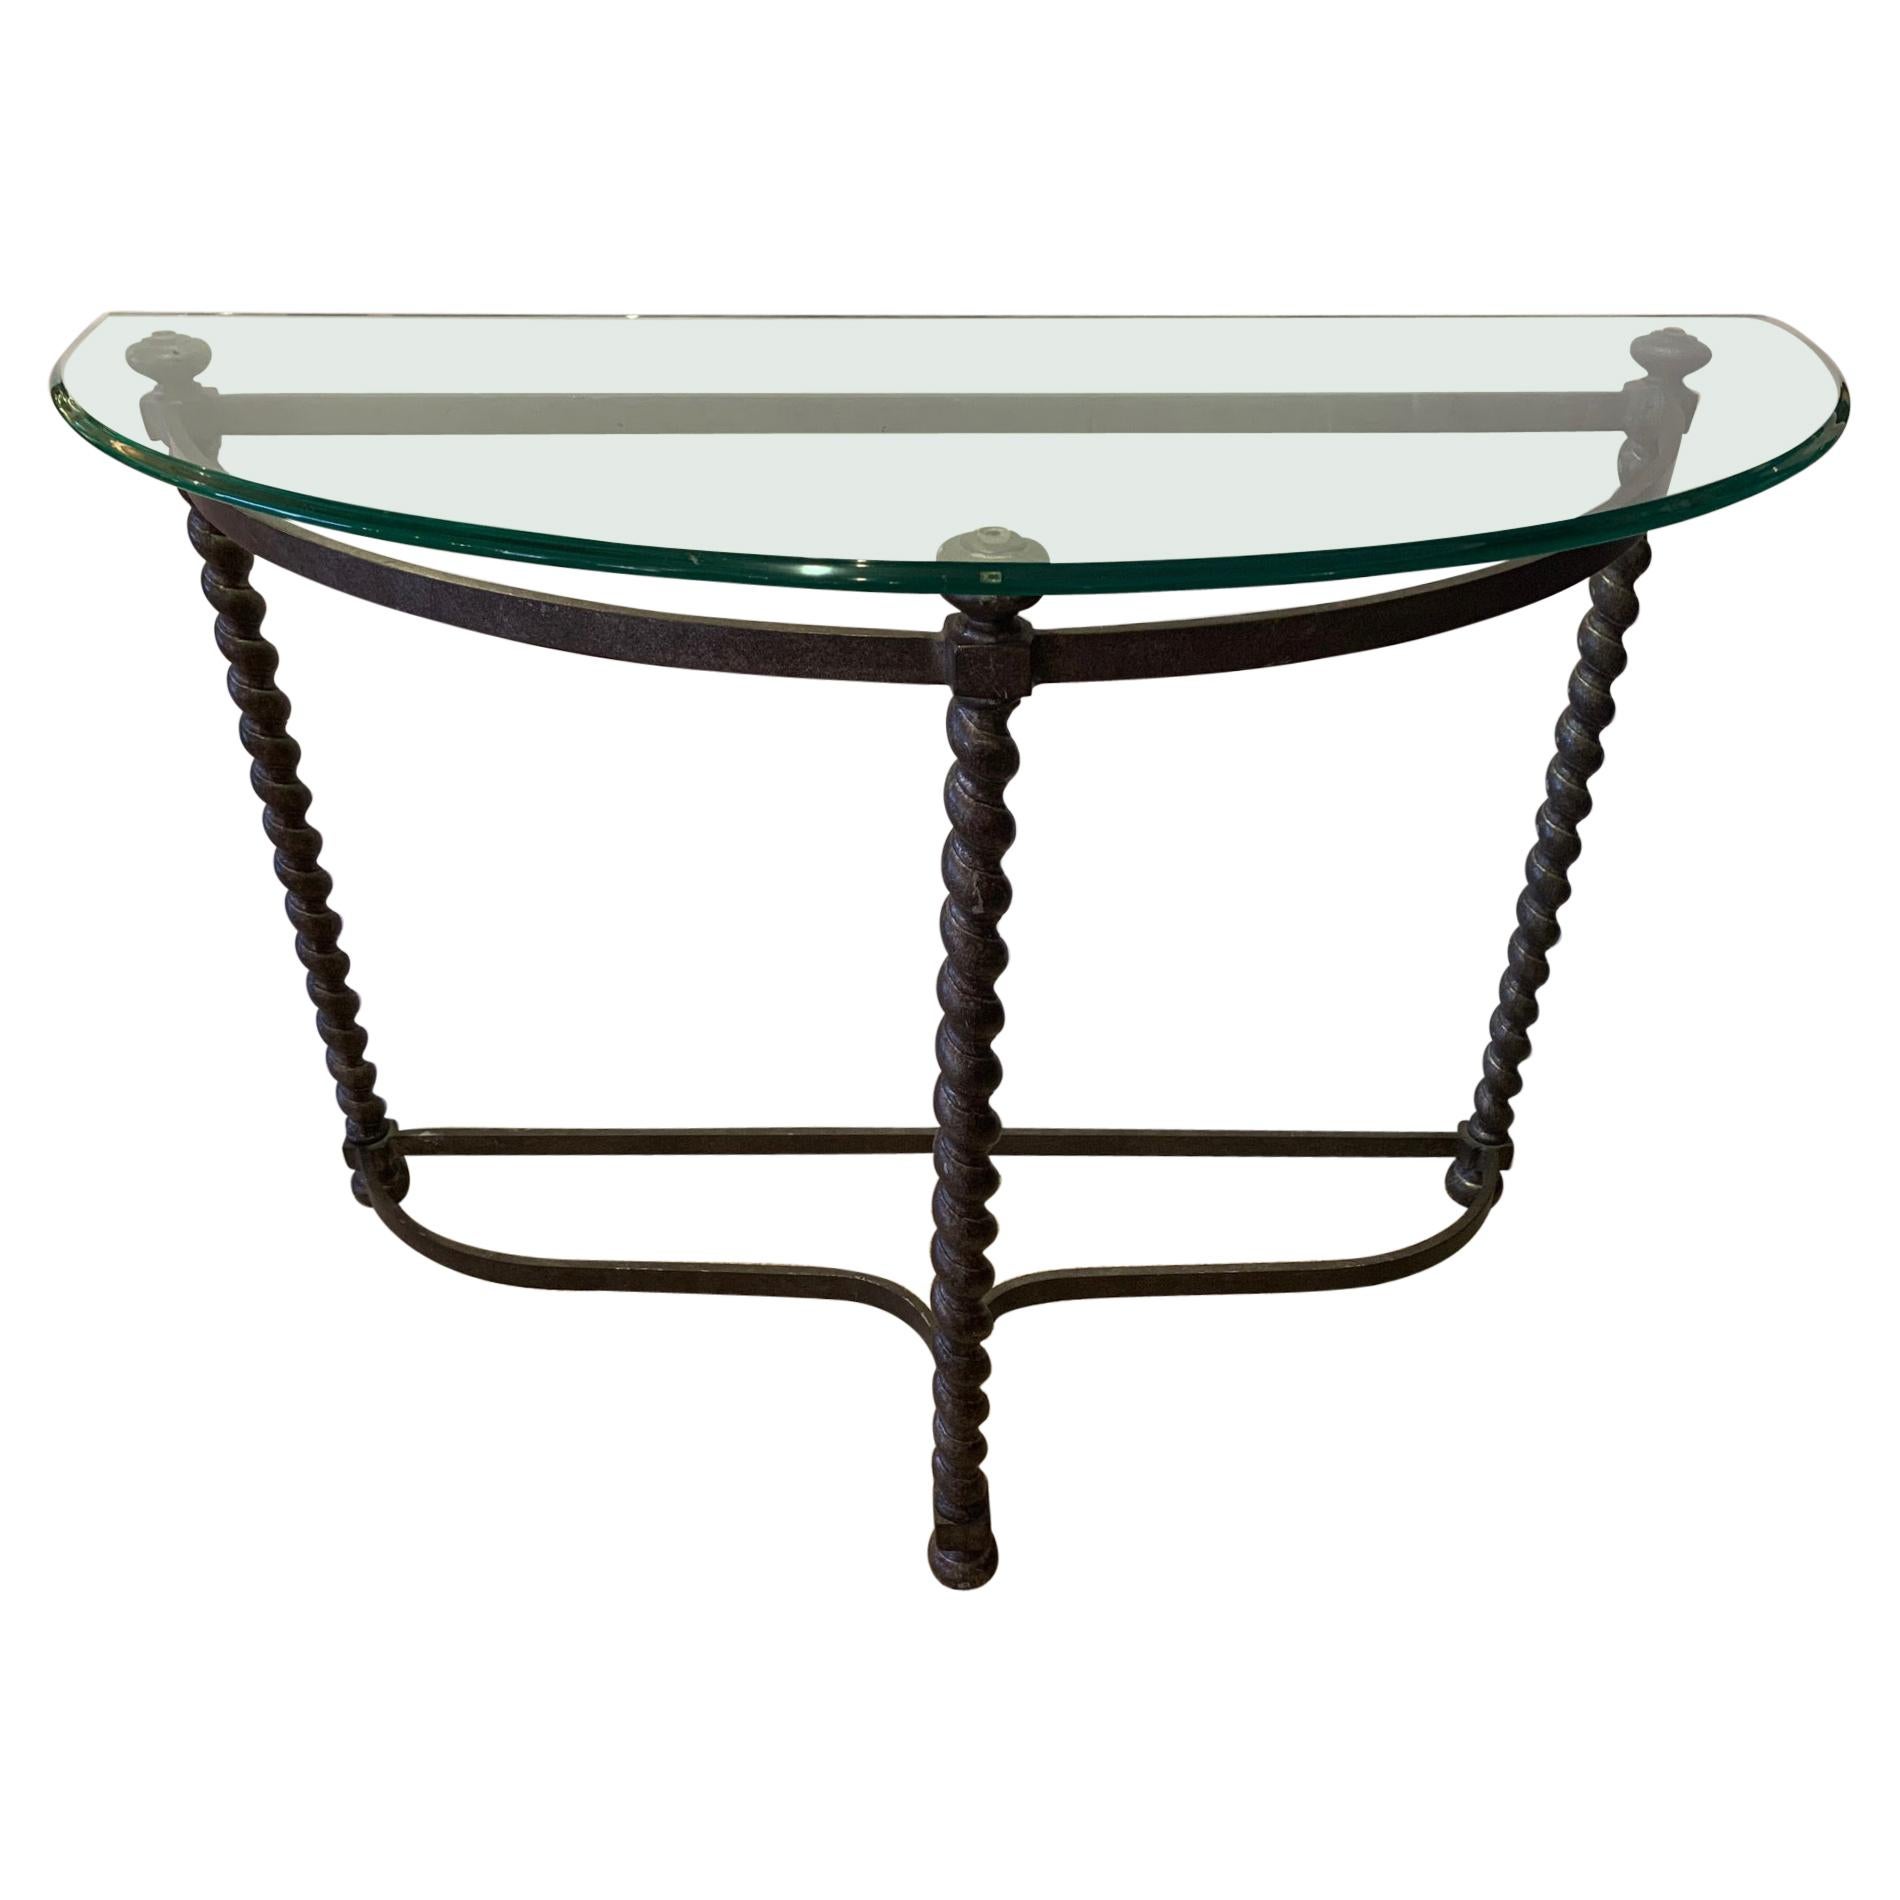 Stunning Iron Barley Twist Demilune Console with Bevelled Glass Top